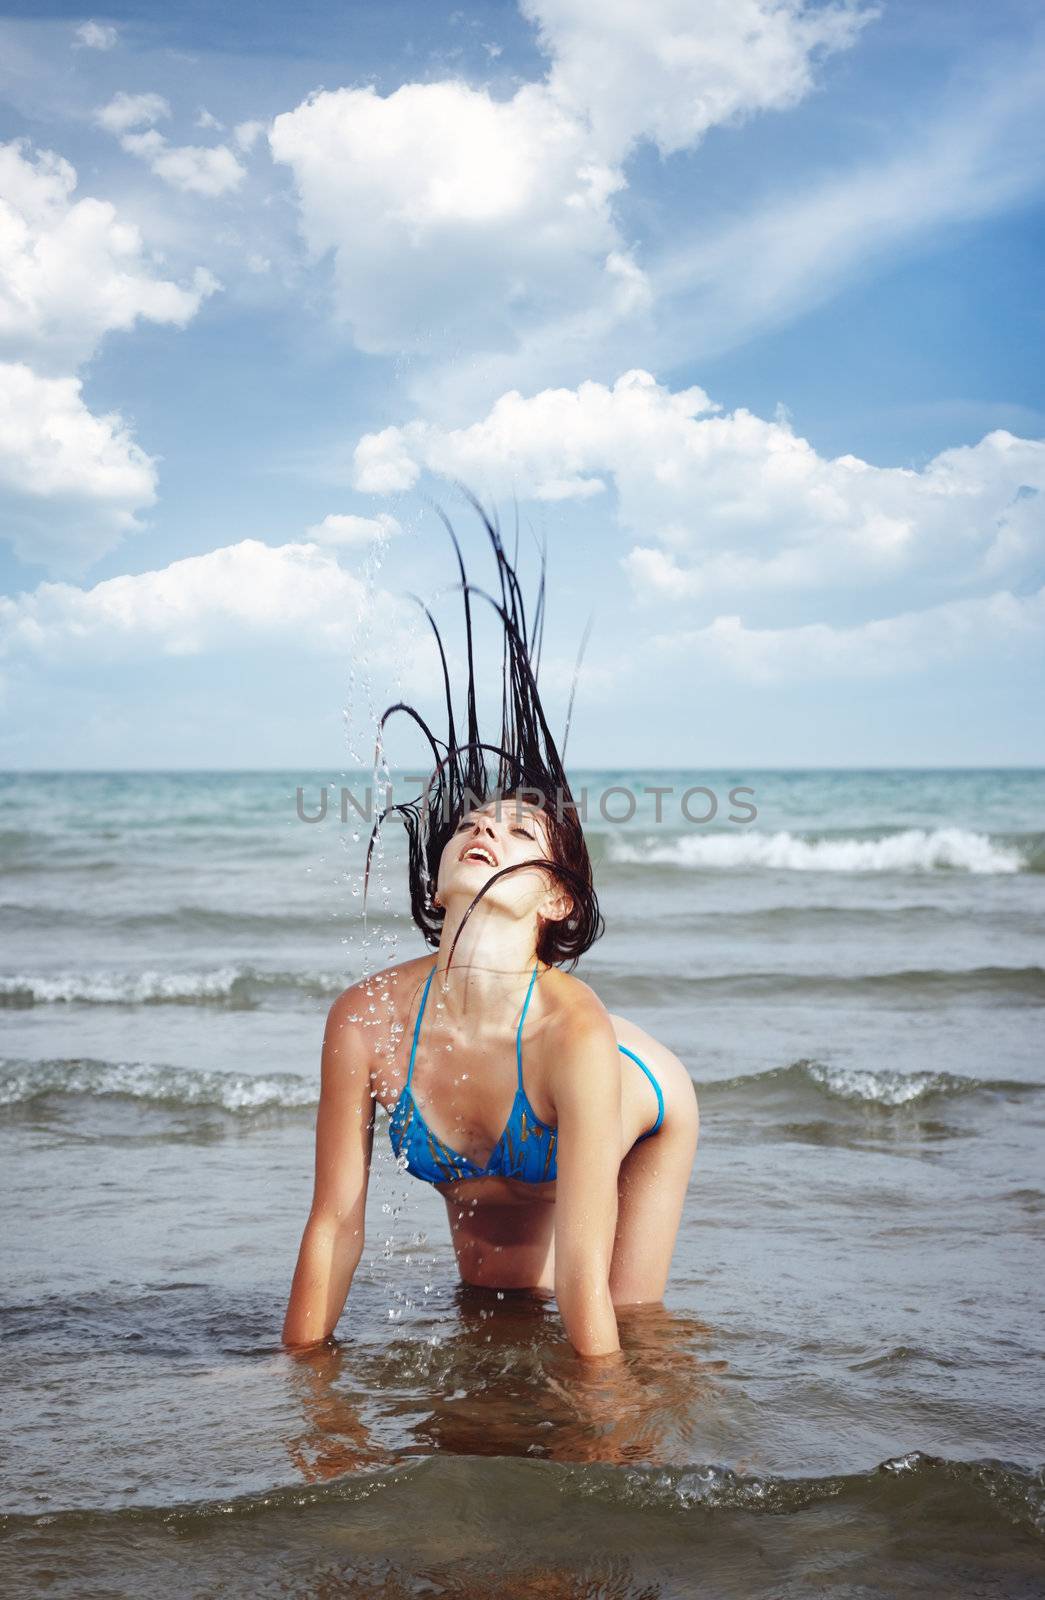 Beach scene with lady in the water moving her hair